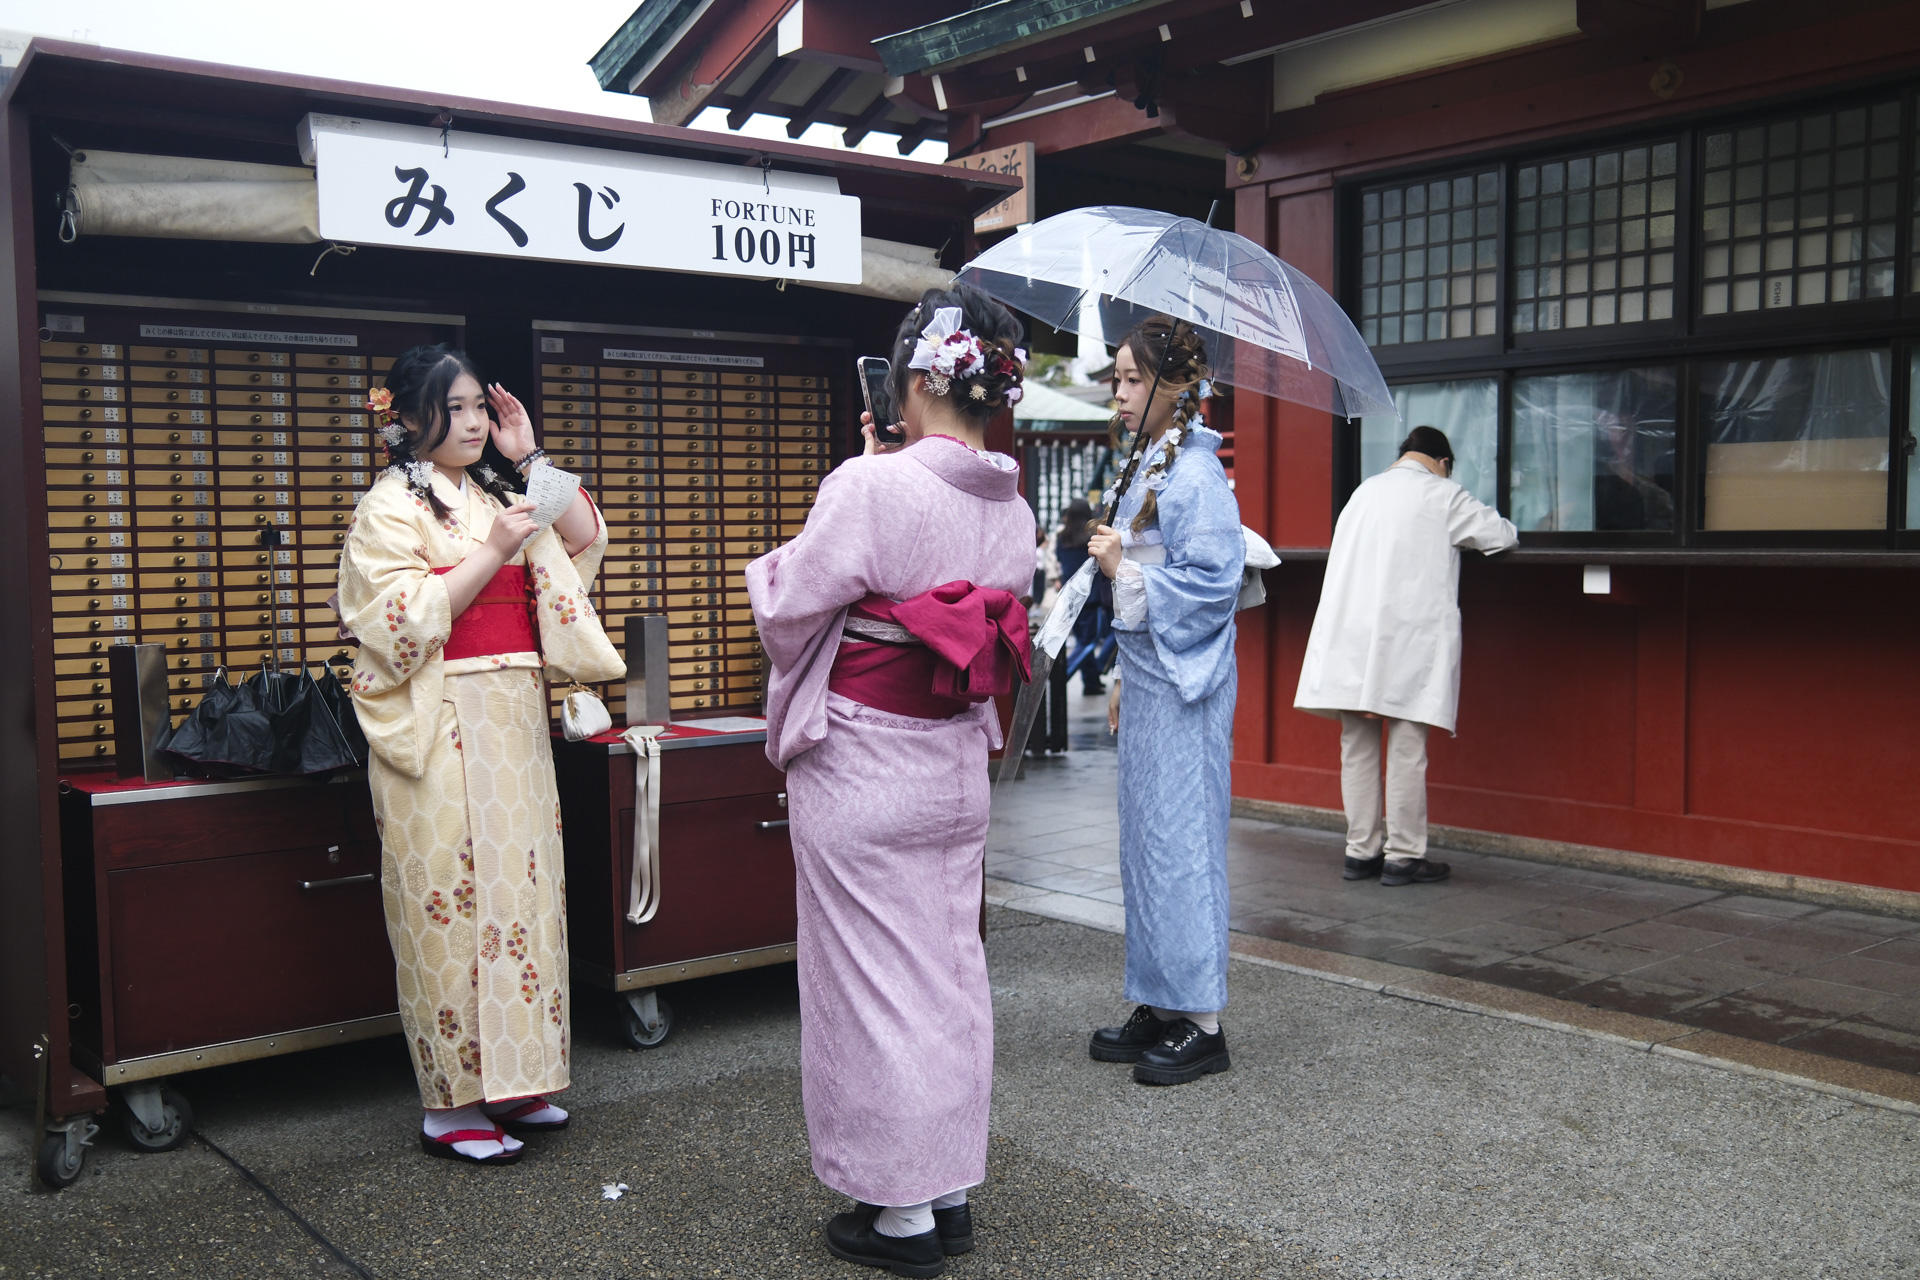 Street photo of ladies in traditional Japanese attire